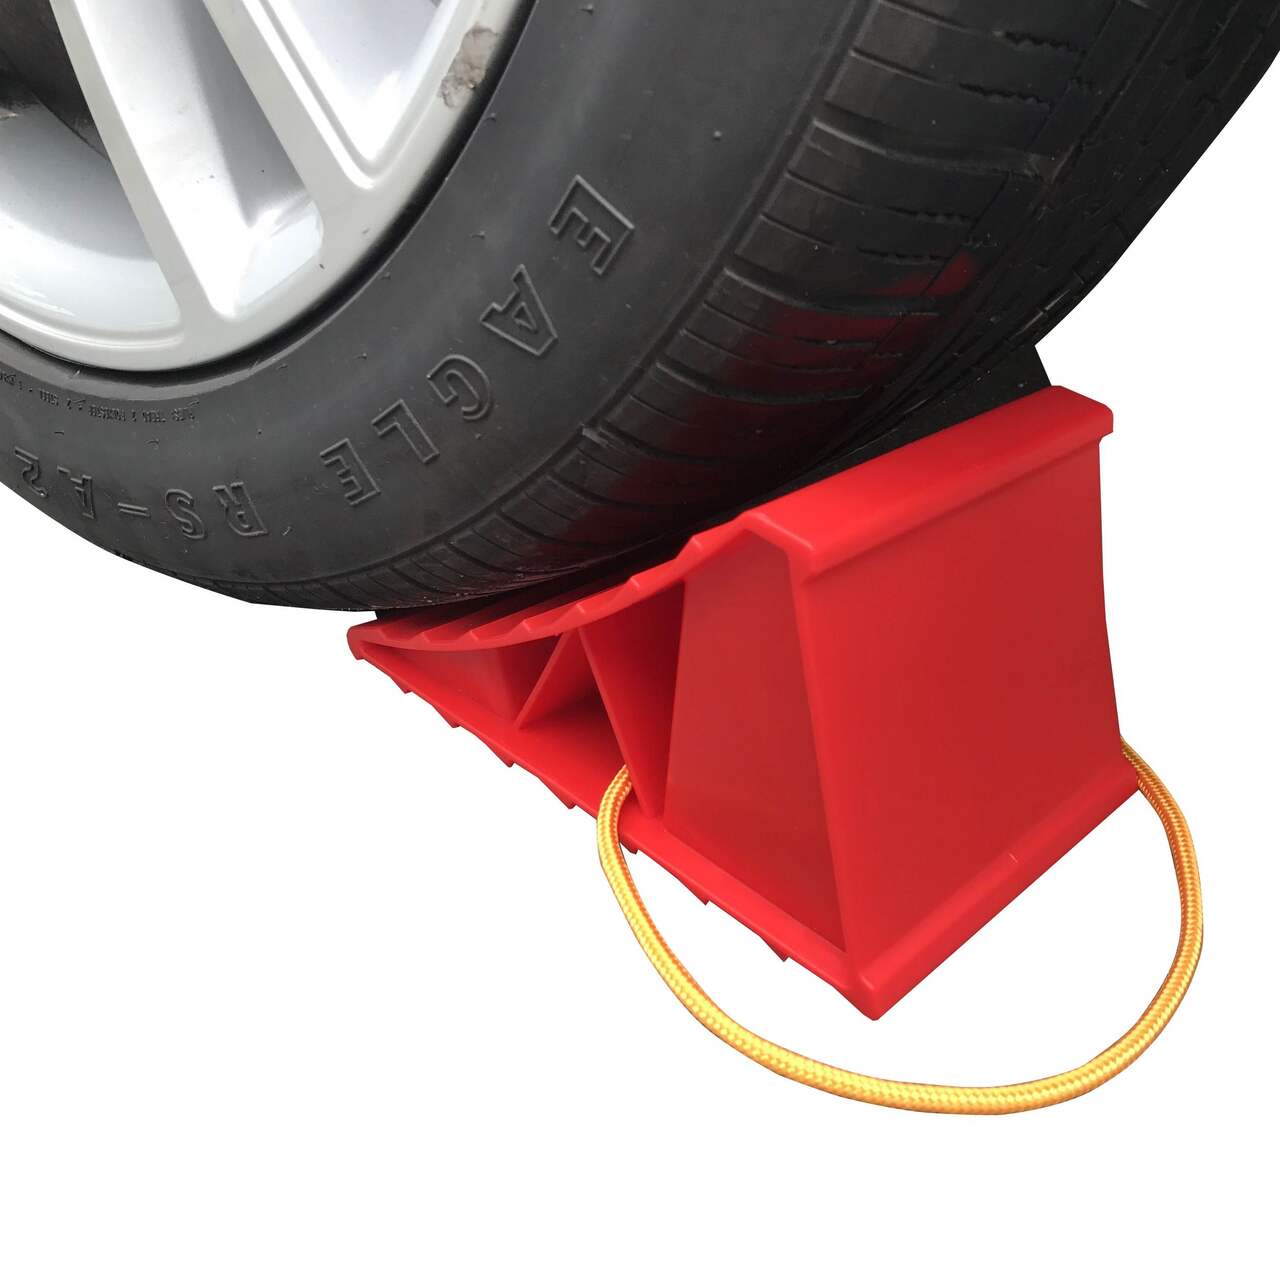 https://media-www.canadiantire.ca/product/automotive/automotive-outdoor-adventure/auto-travel-storage/0408273/wheel-chock-with-rope-small-64274794-5abe-4b20-89d3-932aa896200c-jpgrendition.jpg?imdensity=1&imwidth=640&impolicy=mZoom